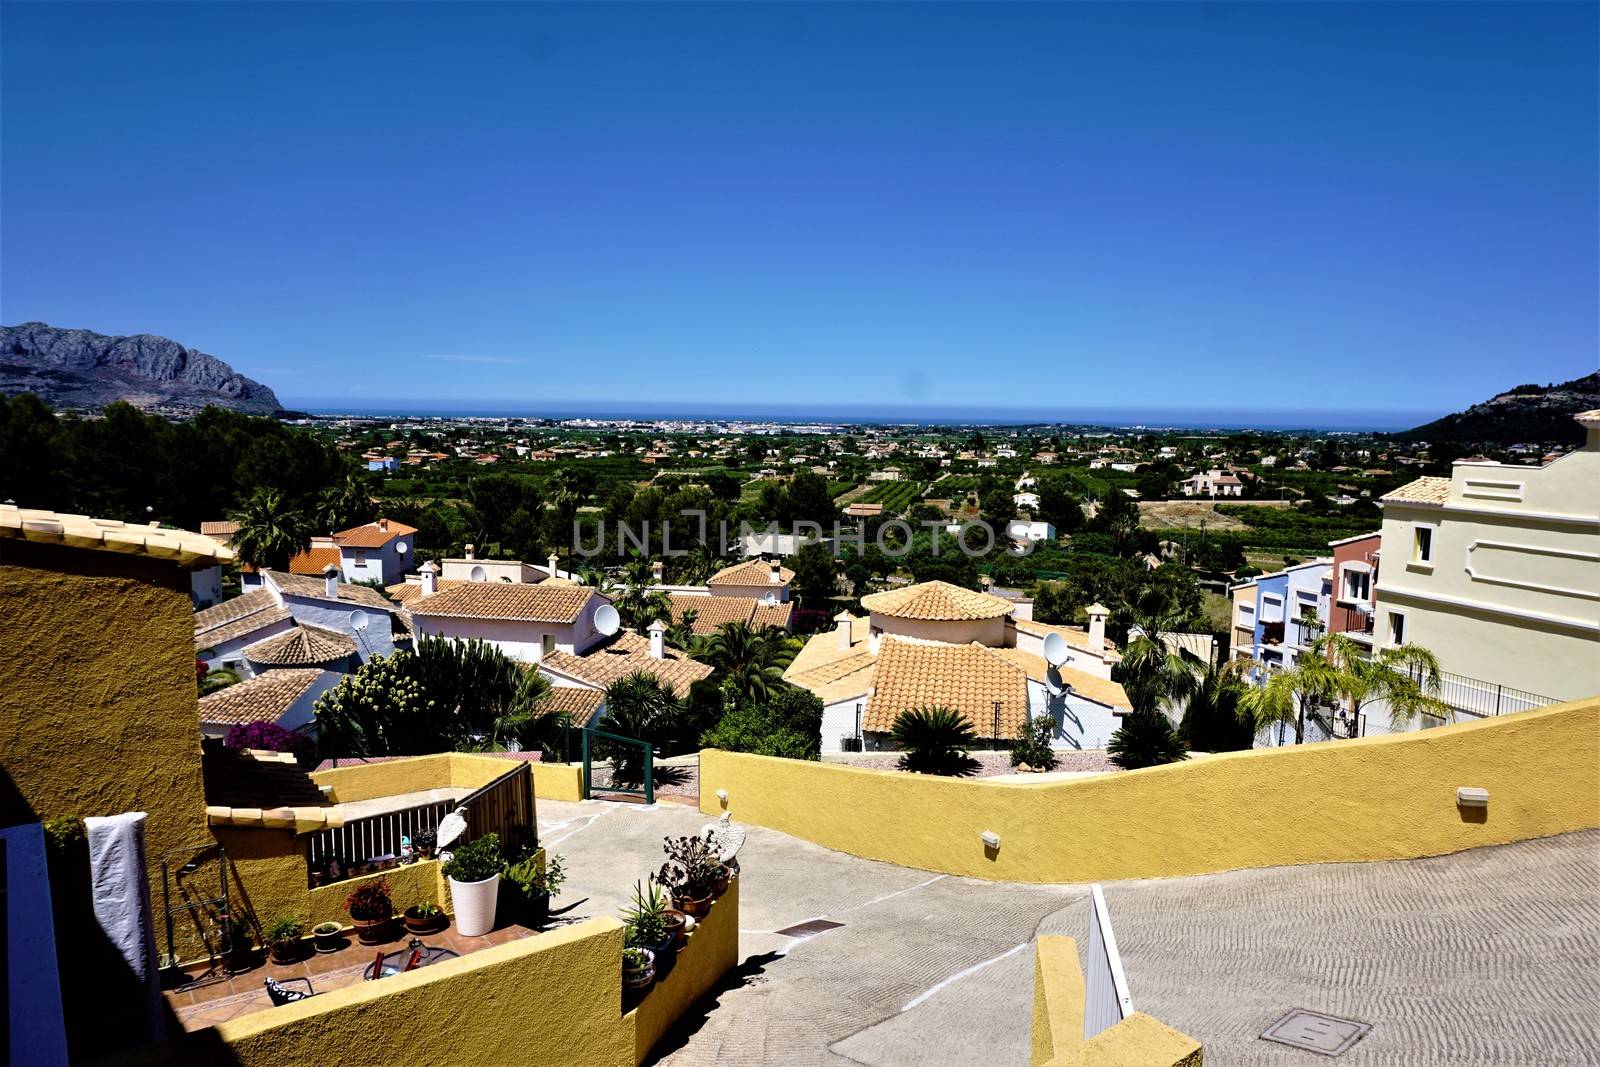 Panoramic view over Pedreguer to Denia by pisces2386